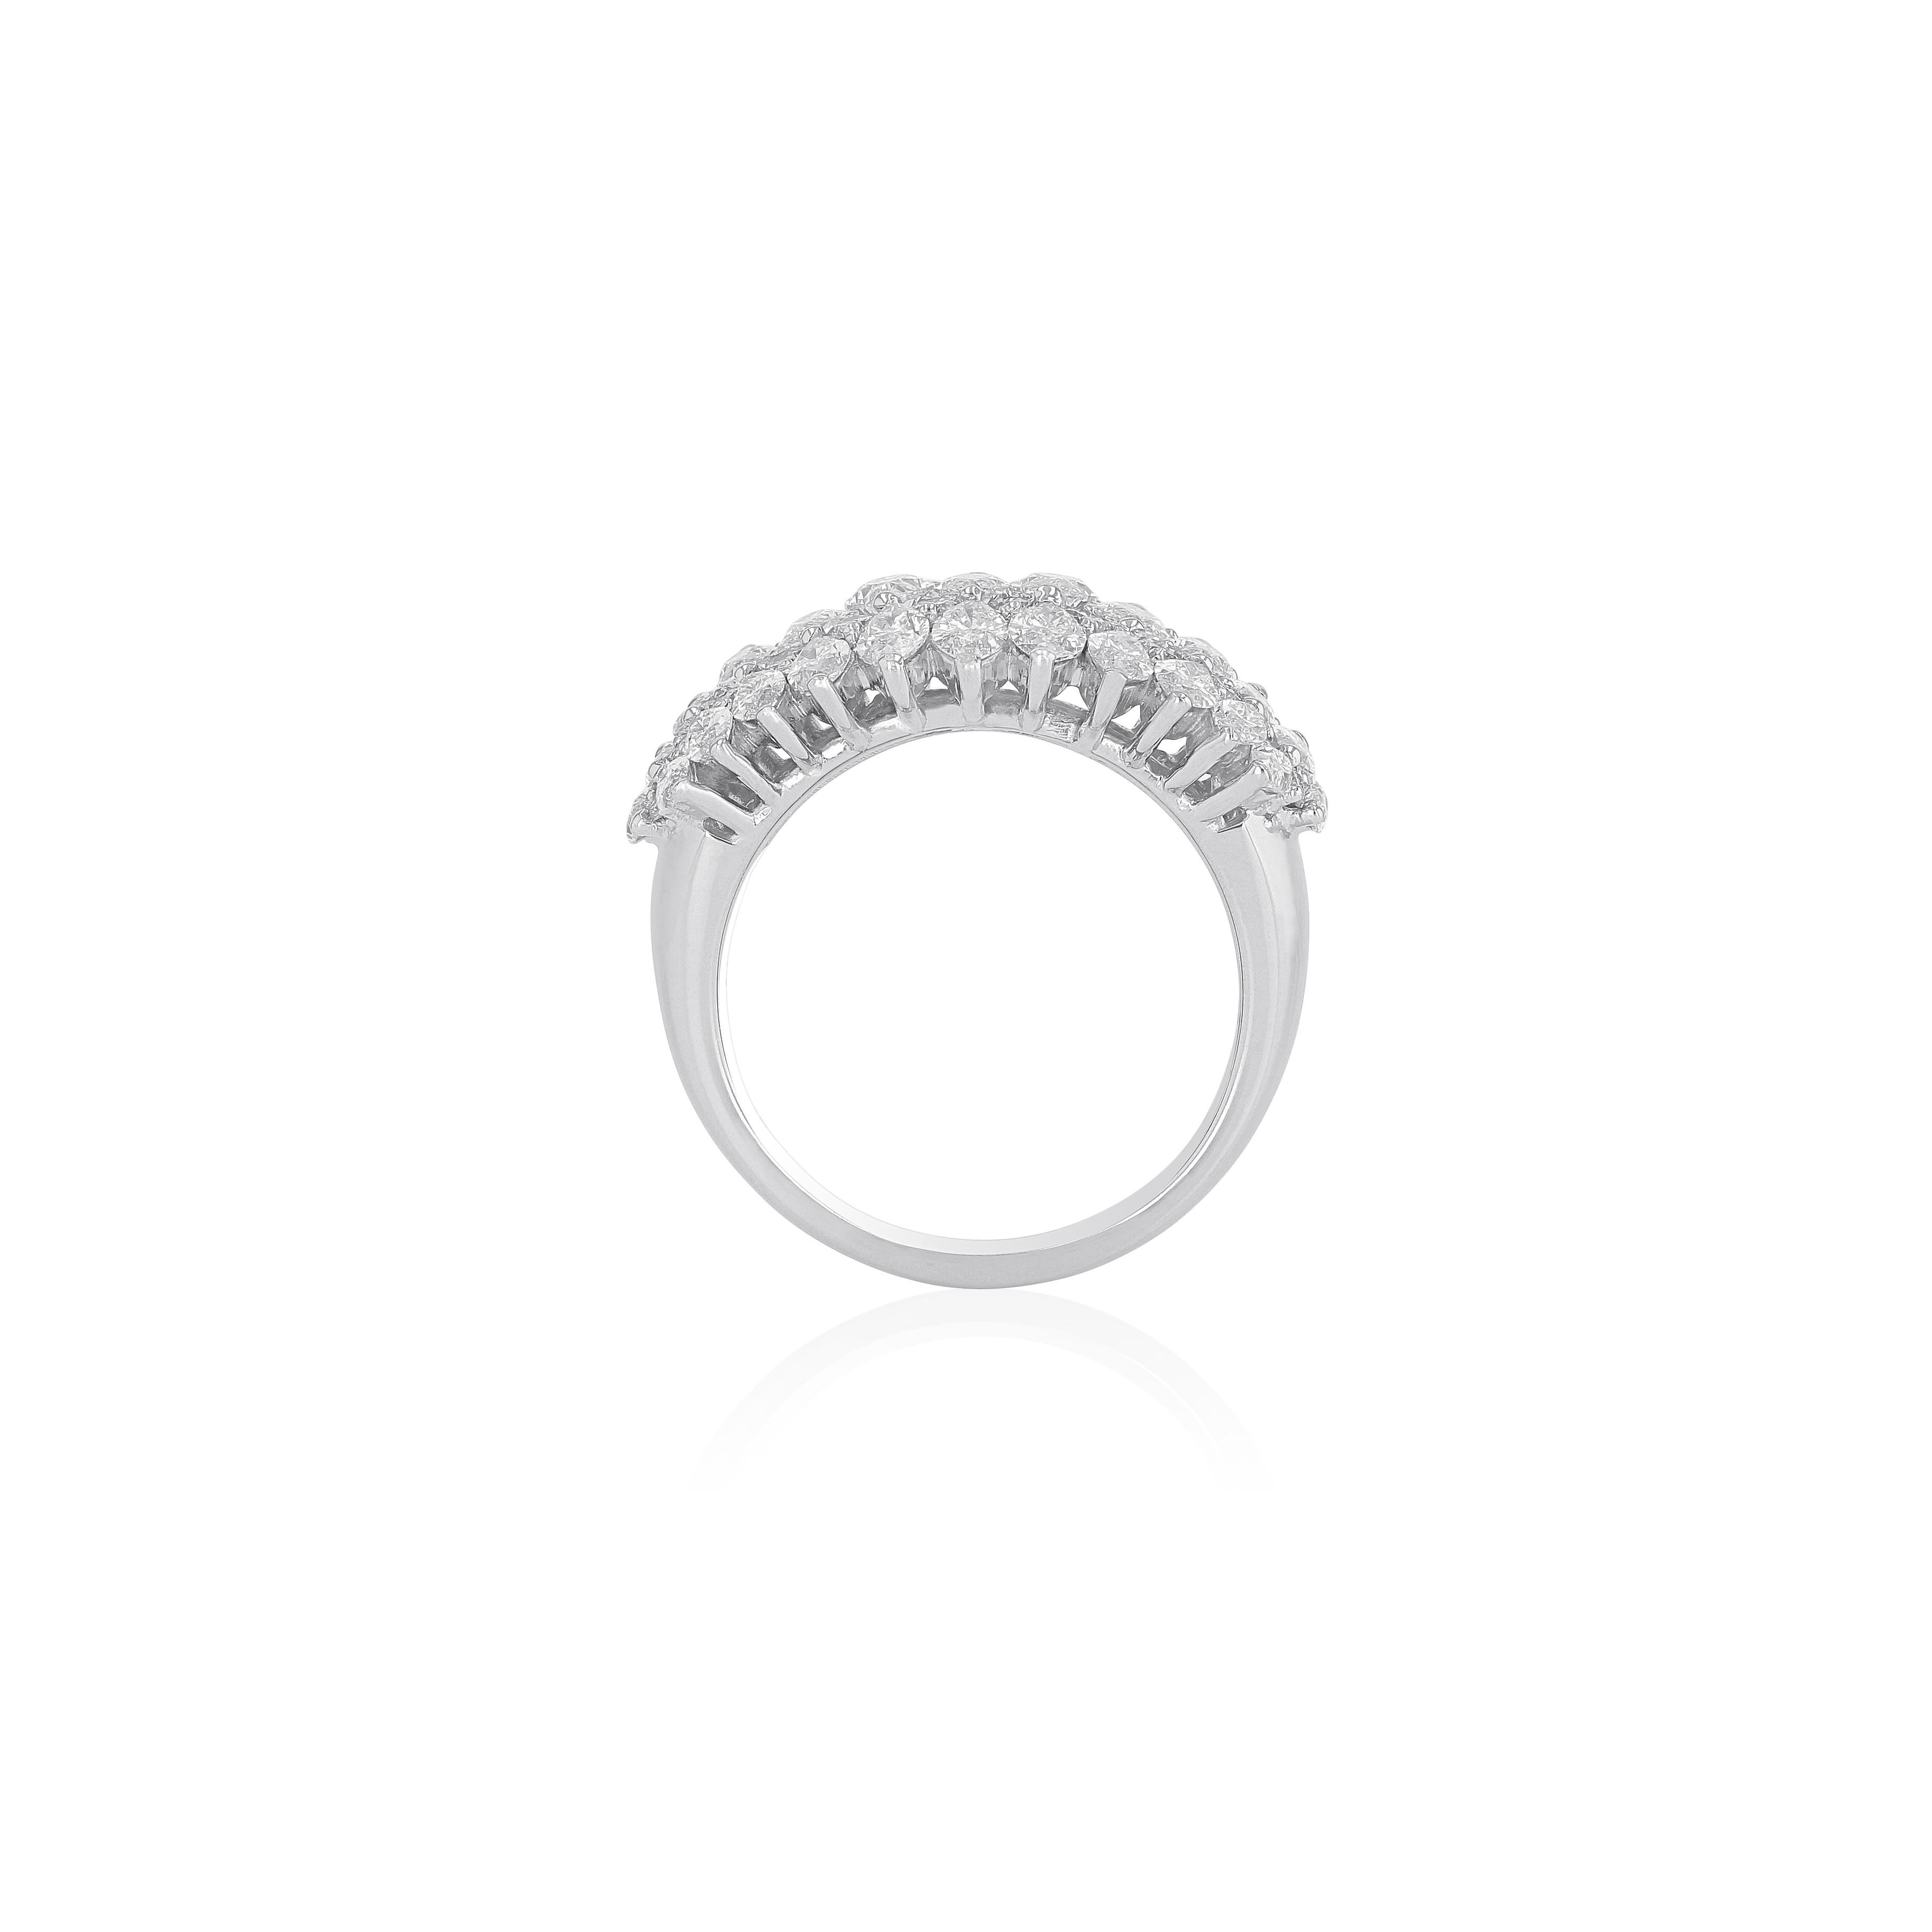 Classic and contemporary ring by Amwaj jewelry, fully set with Marquise and round shape diamonds that give a delicate touch for a glamorous and feminine look. This ring is a timeless investment that will never go out of fashion. Wear it alone, or